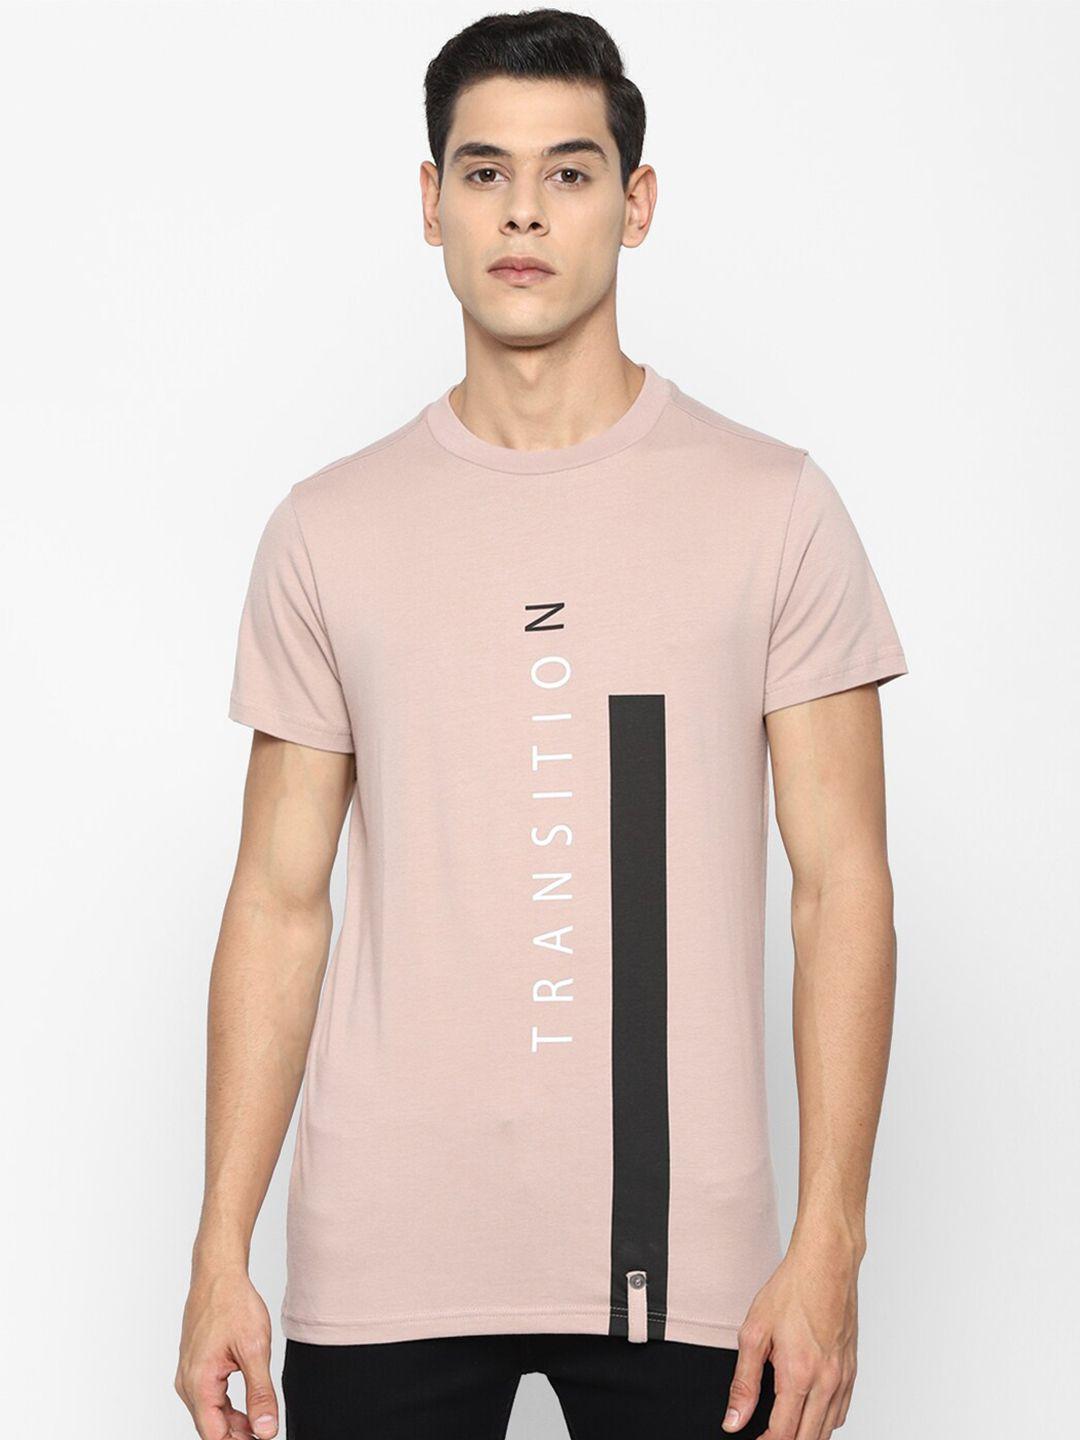 forever-21-men-beige-typography-printed-t-shirt